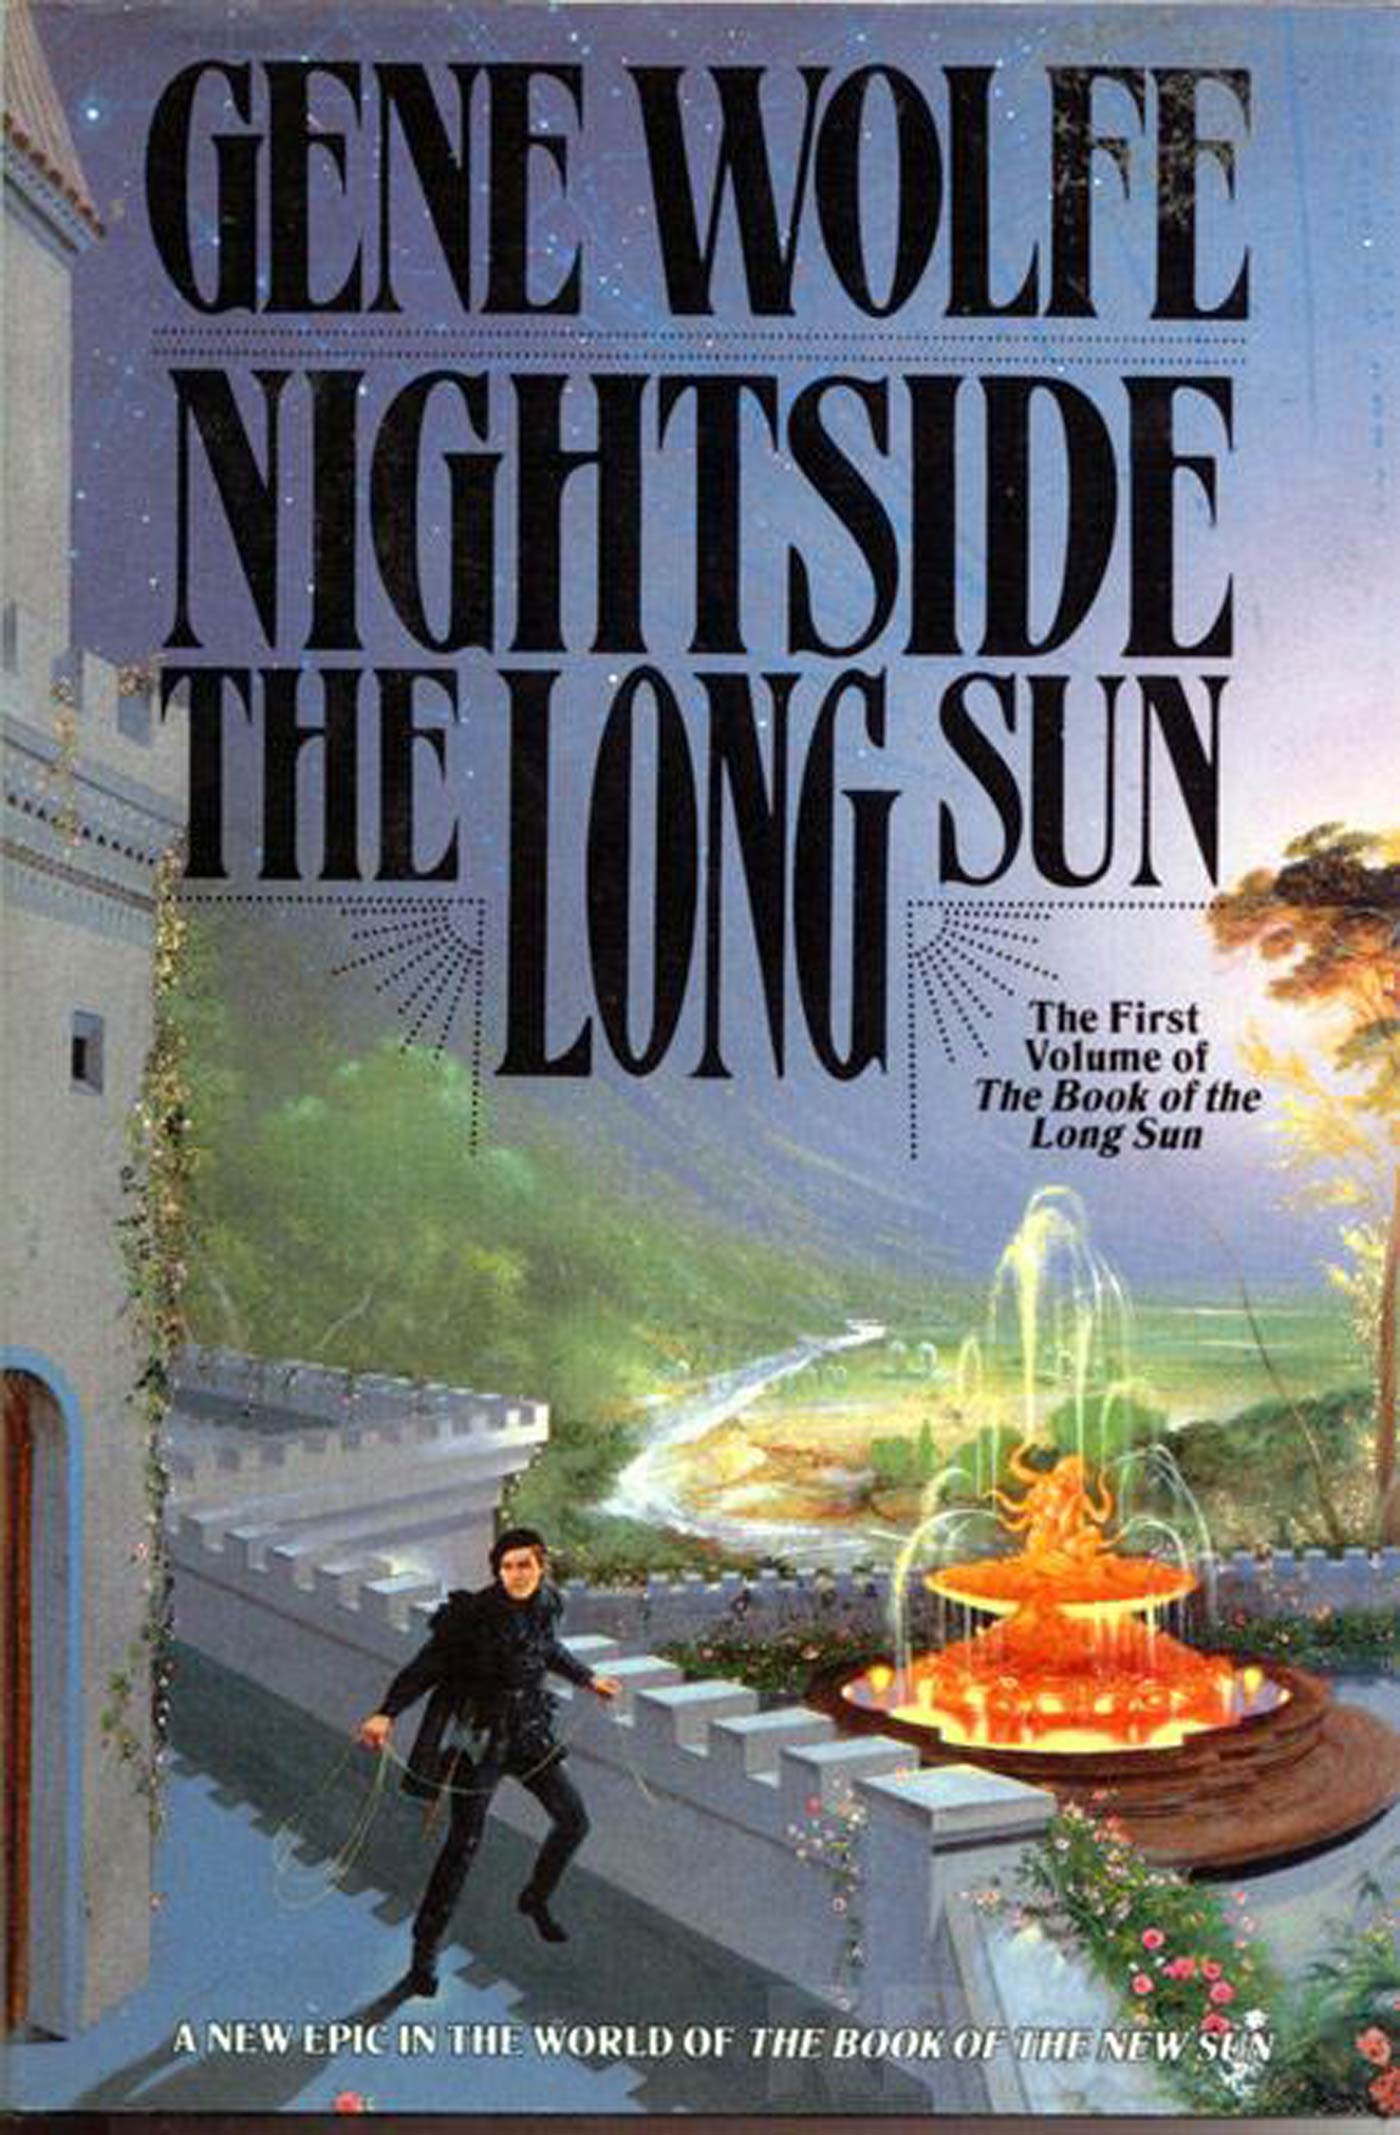 Nightside The Long Sun : The First Volume of the Book of the Long Sun by Gene Wolfe